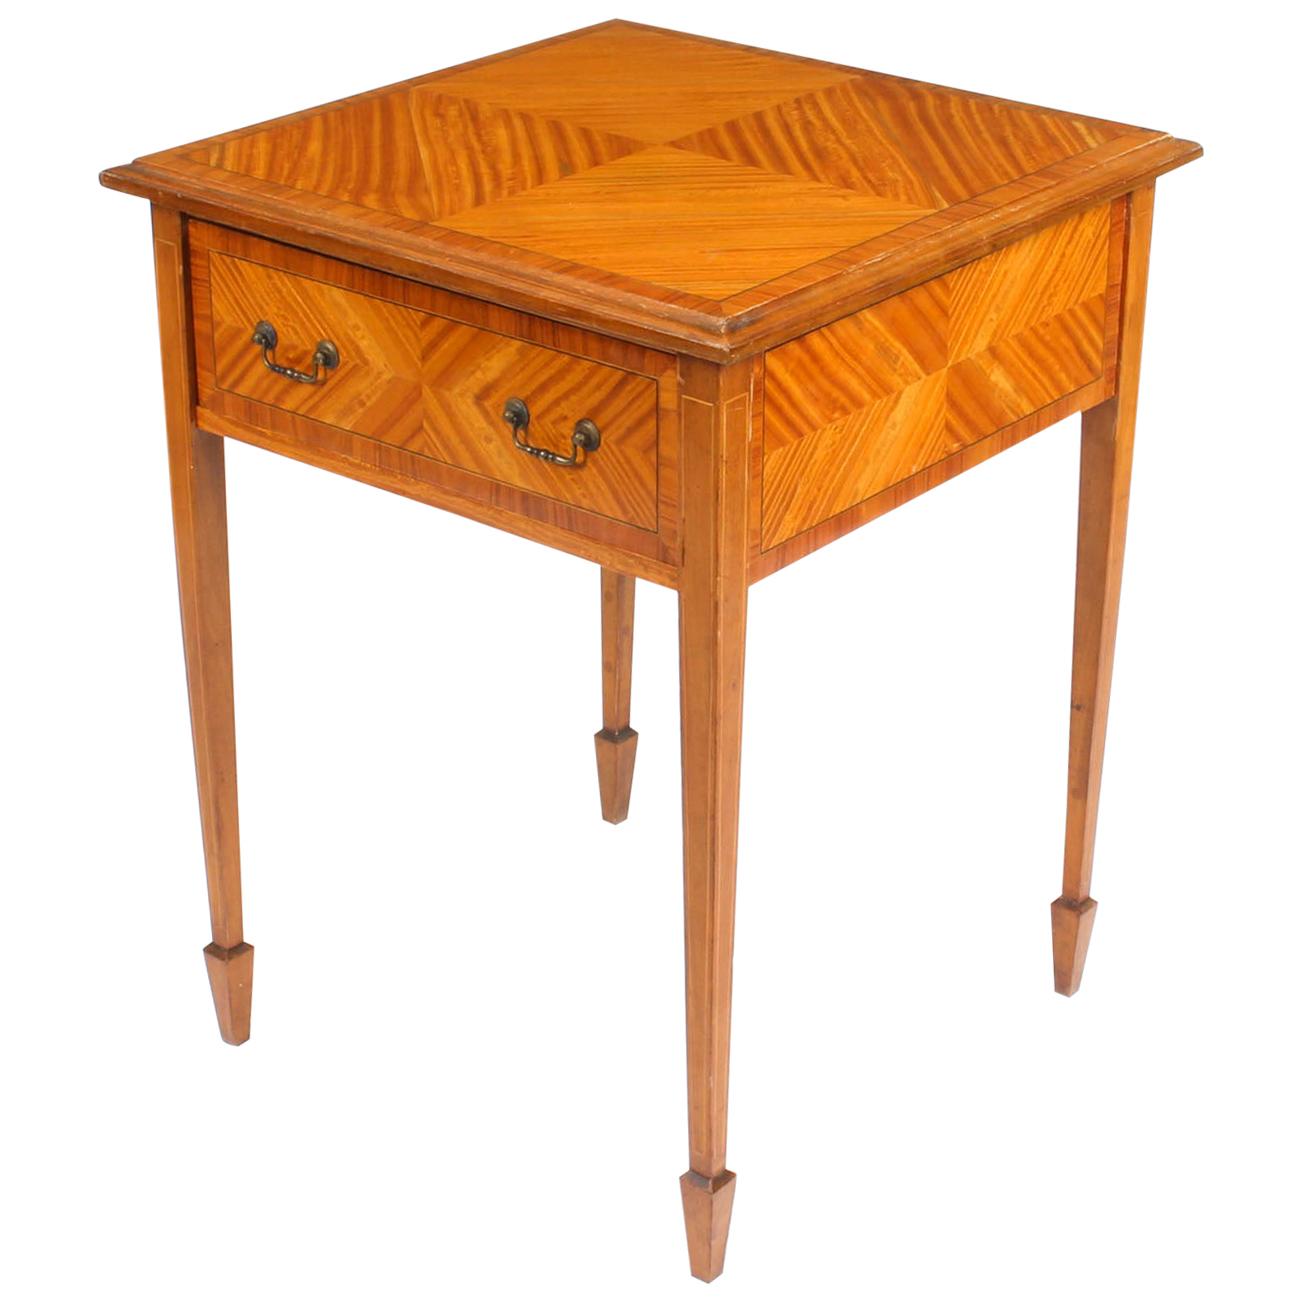 A beautiful antique Victorian satinwood occasional table with an unusually large drawer, circa 1880.

This exquisitely crafted piece is made from satinwood with kingwood crossbanding and boxwood inlay.

Add an elegant touch to your home with